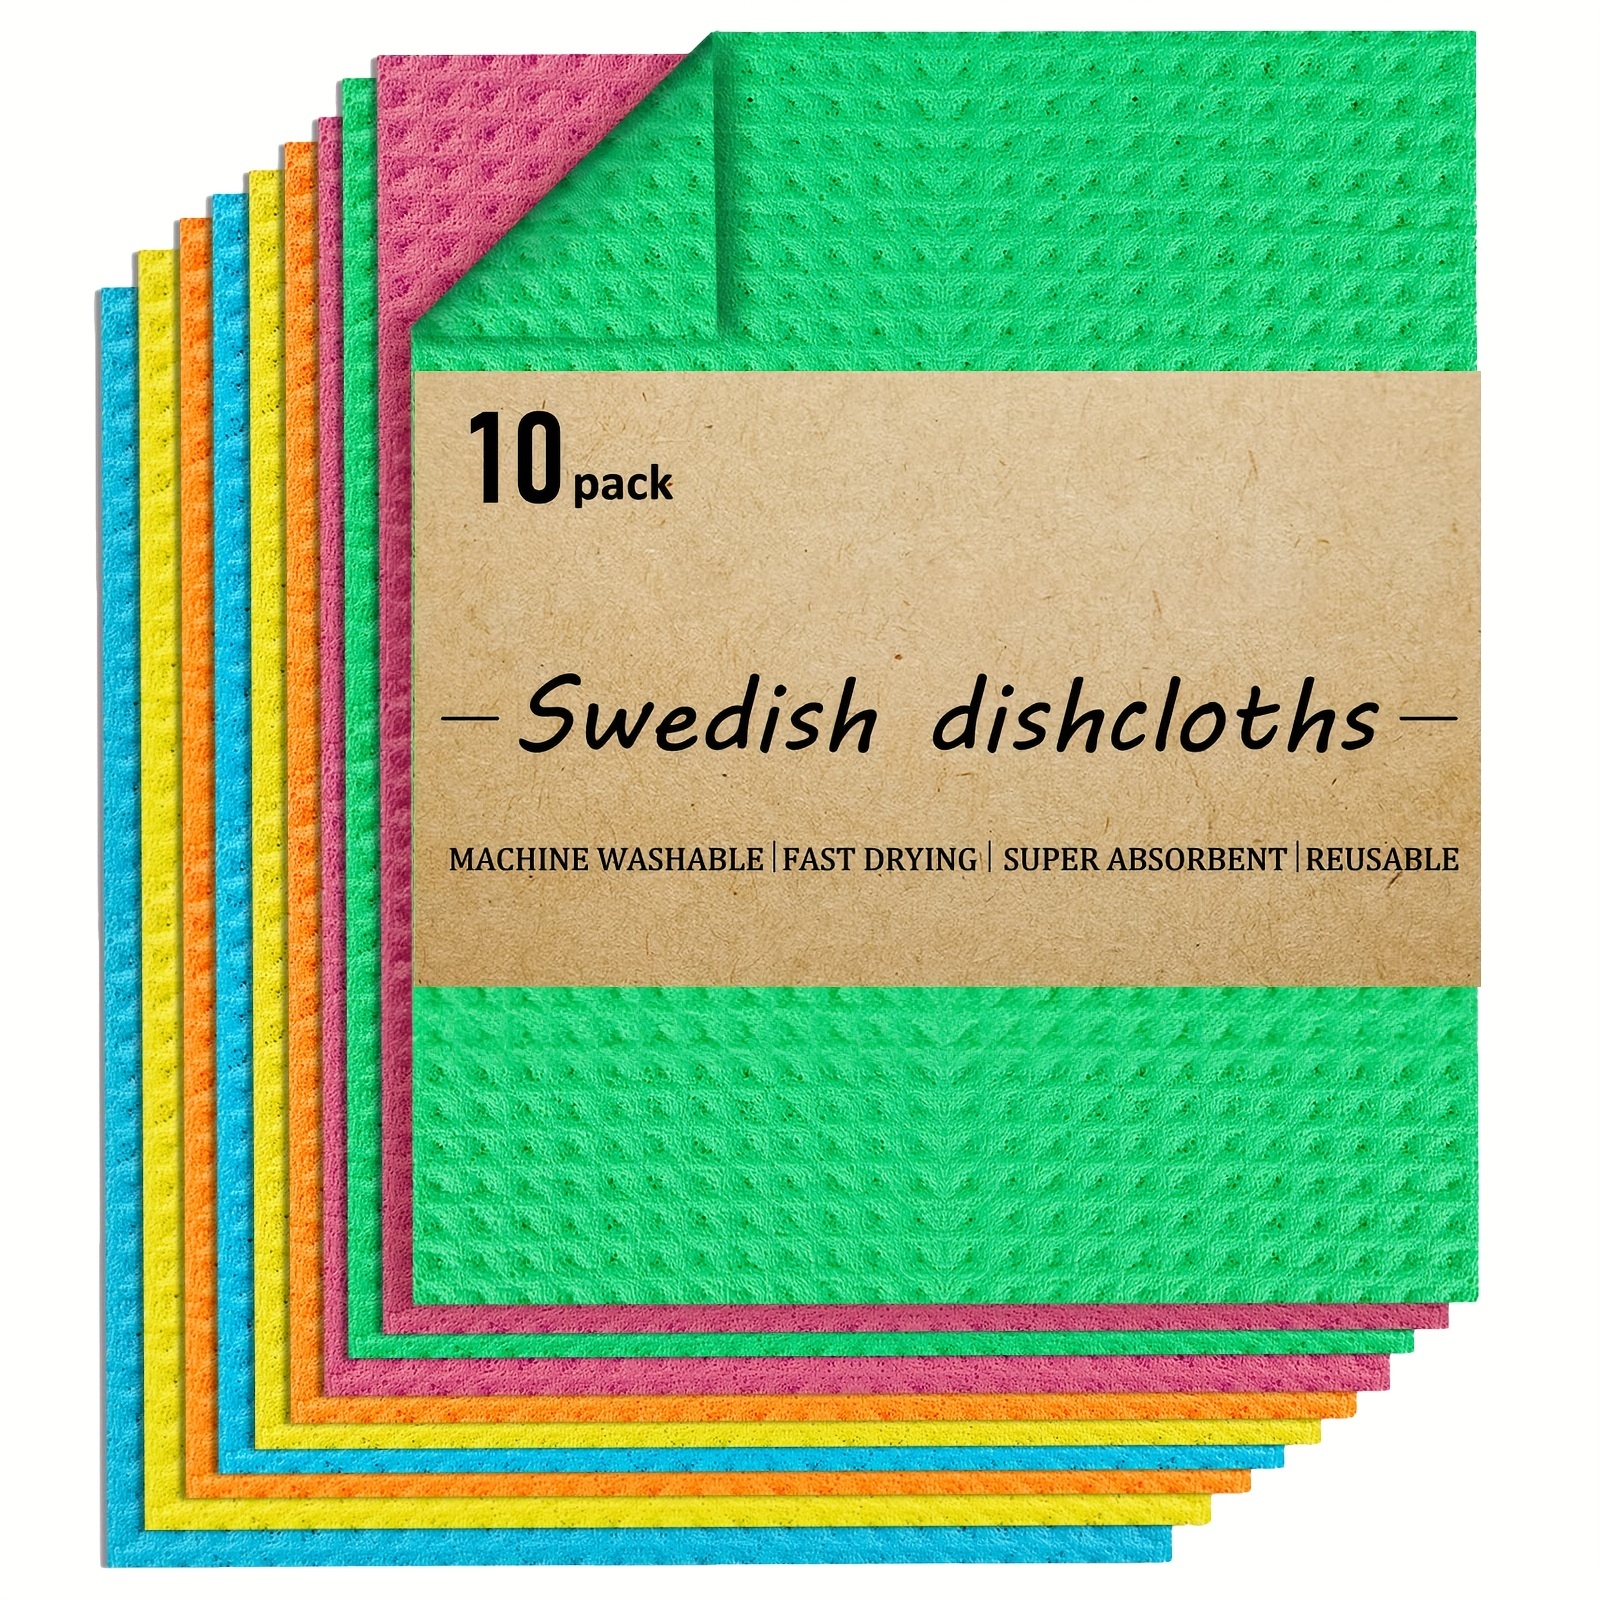 Swedish Dish Cloths - 10 Pack Reusable, Absorbent Hand Towels For